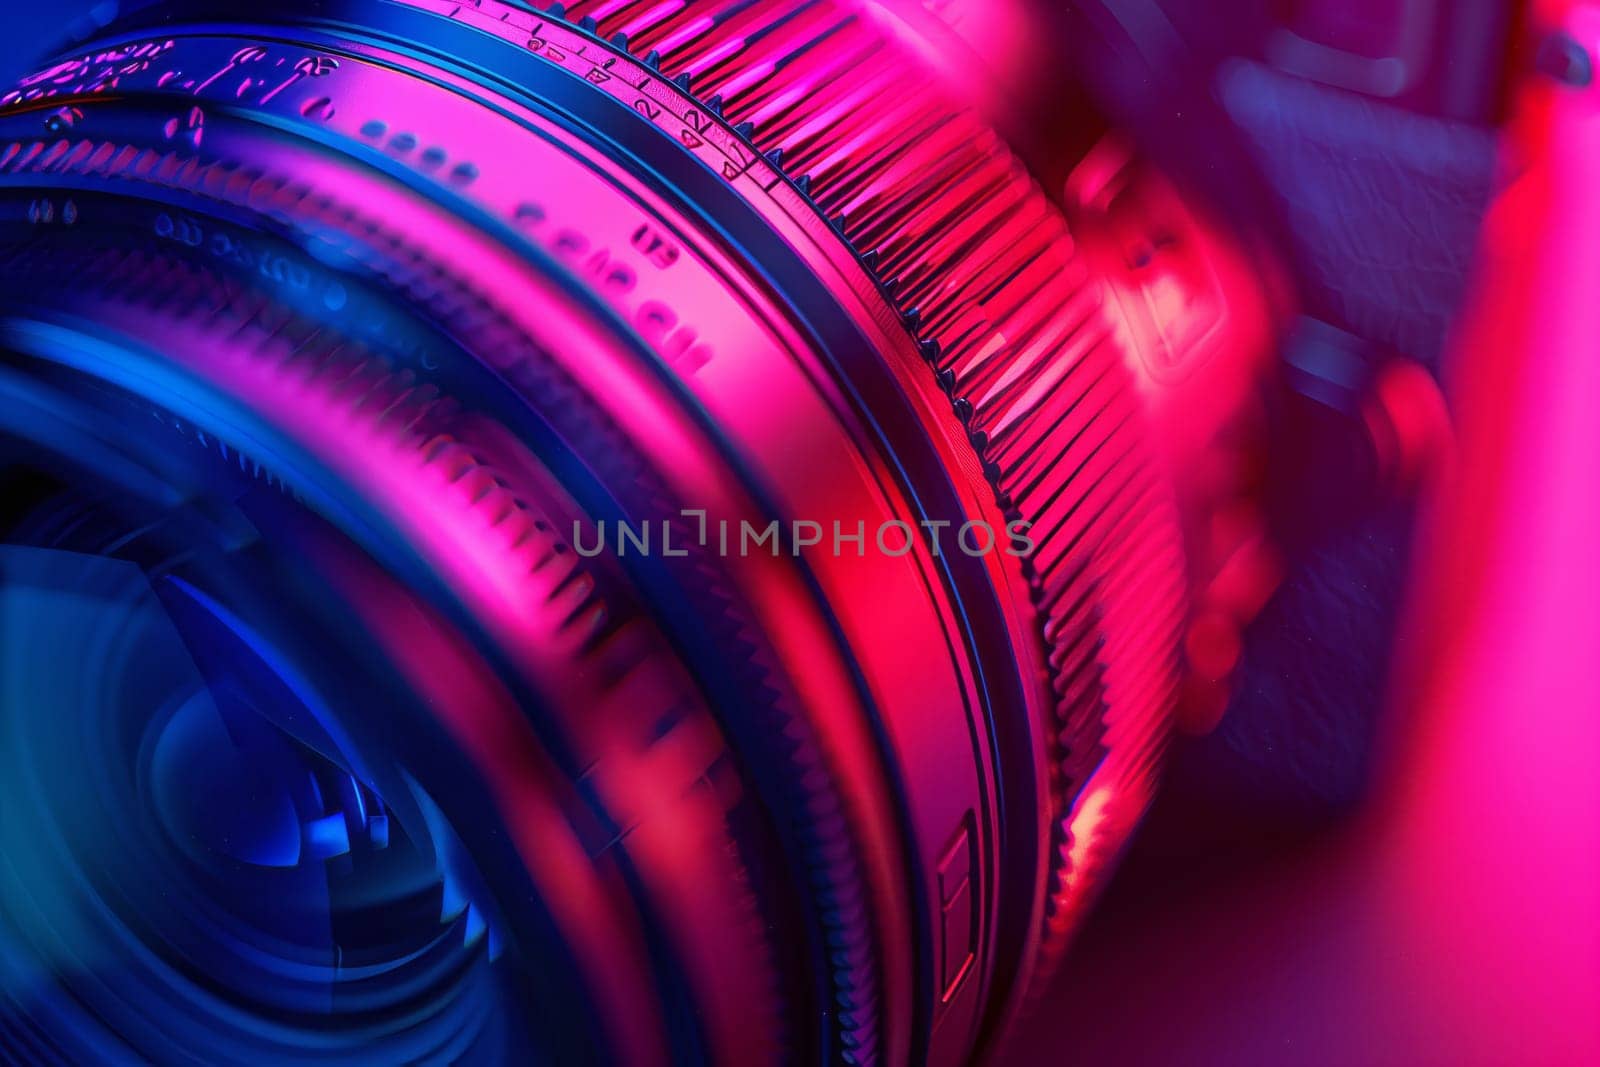 A camera lens up close, with vibrant purple and blue lights in the background, creating an atmosphere of entertainment and colorfulness